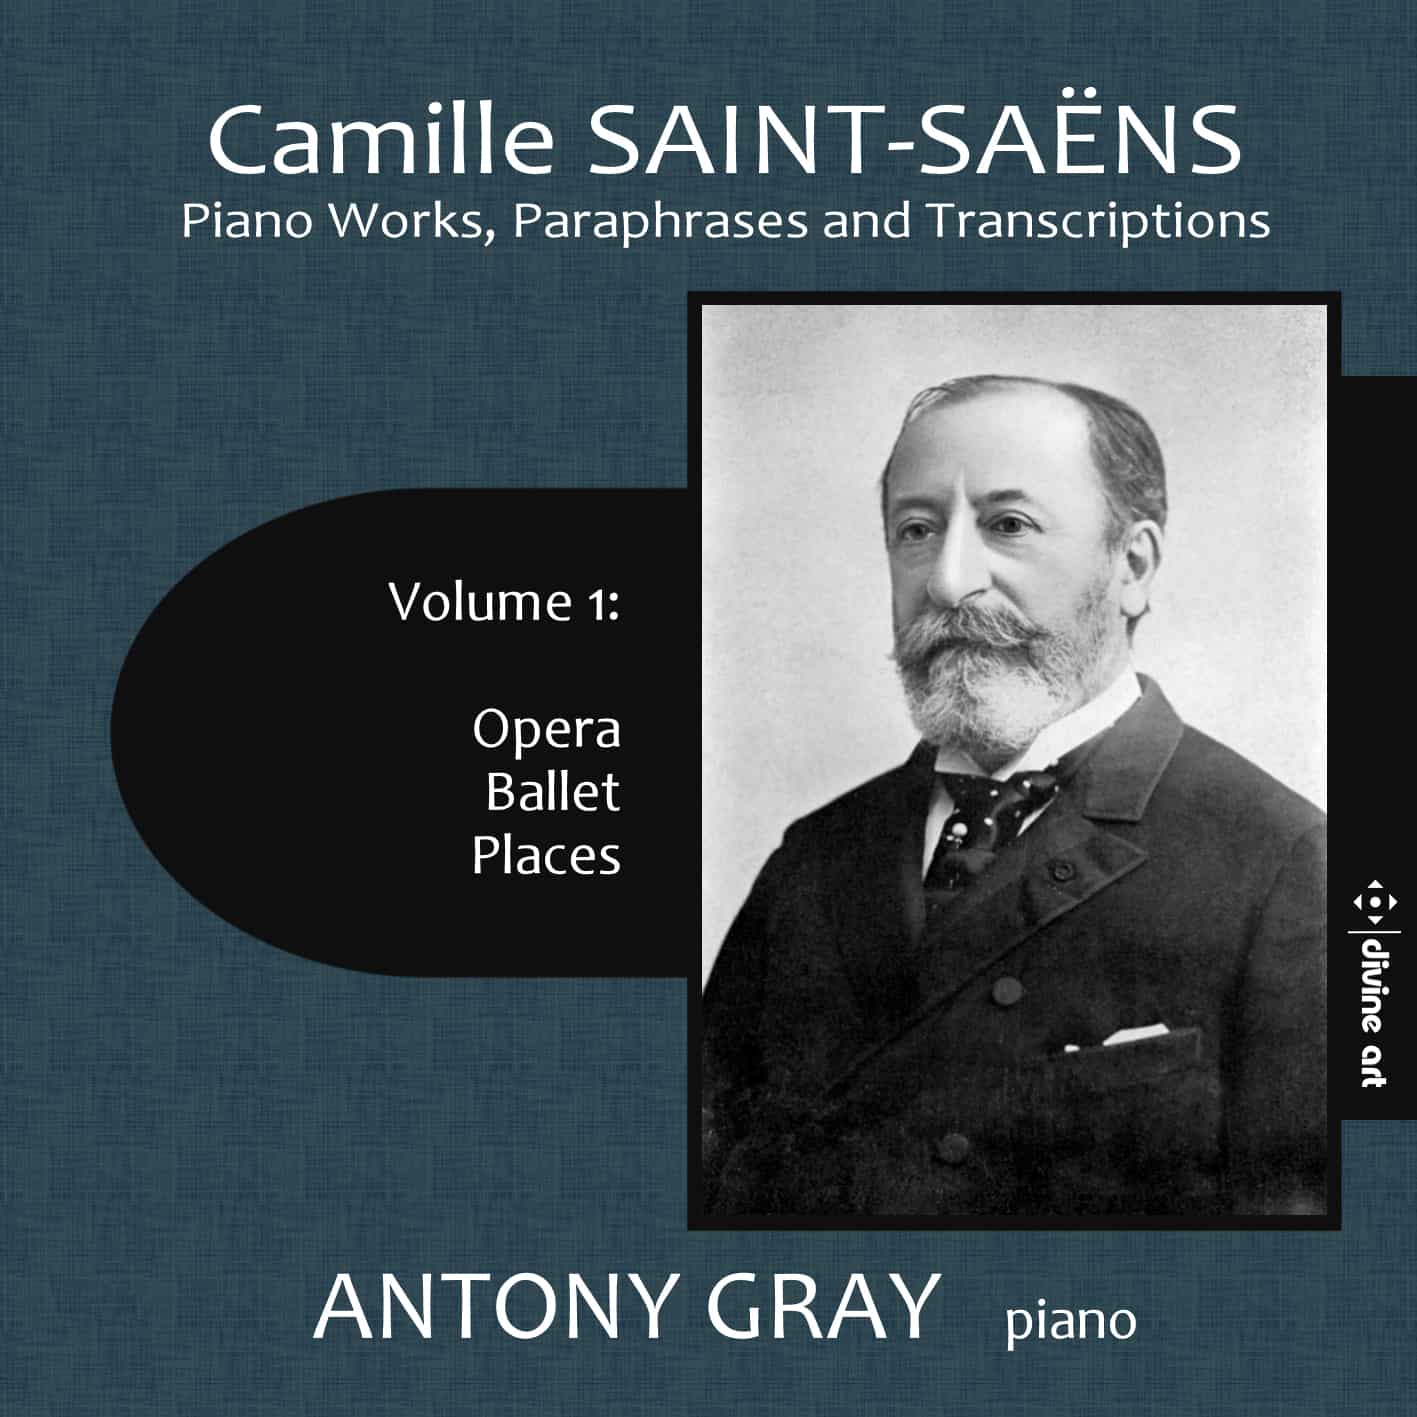 Camille Saint-Saëns: Works for Piano, Volume 1